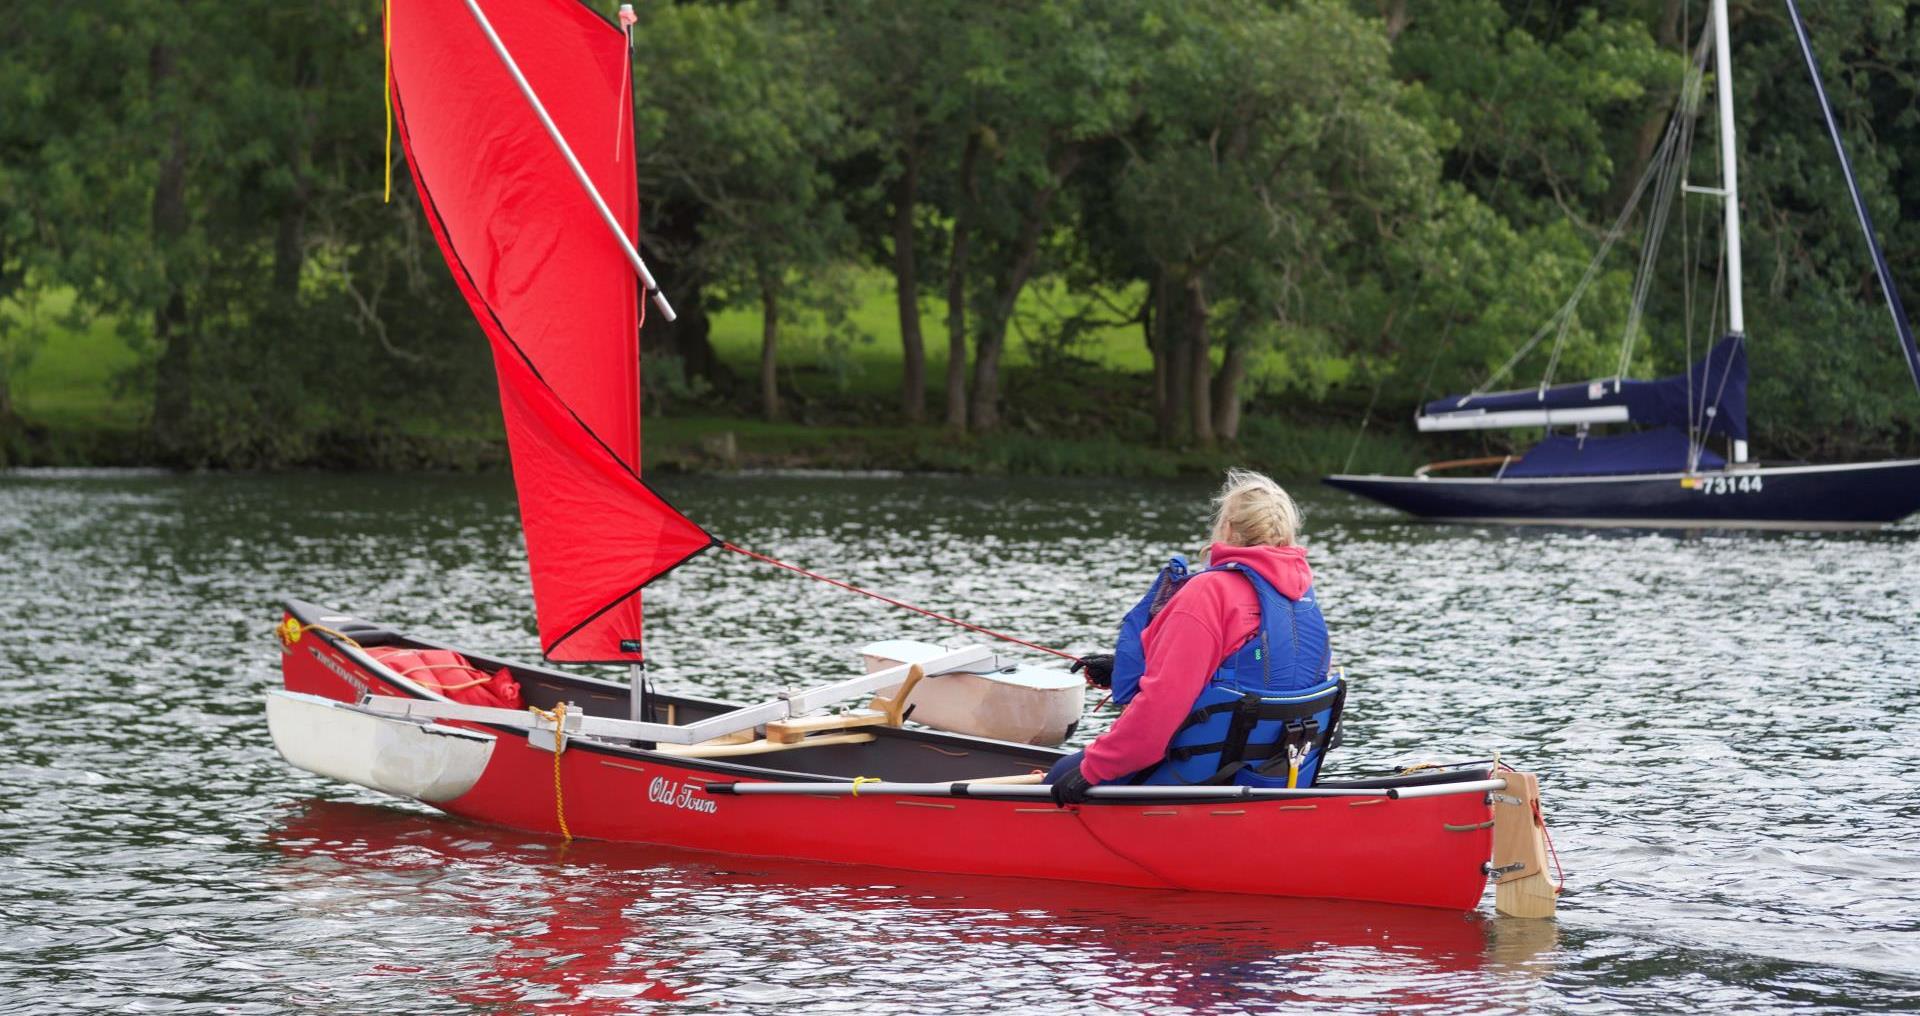 accessible canoeing, with adapted seated and outriggers for stability